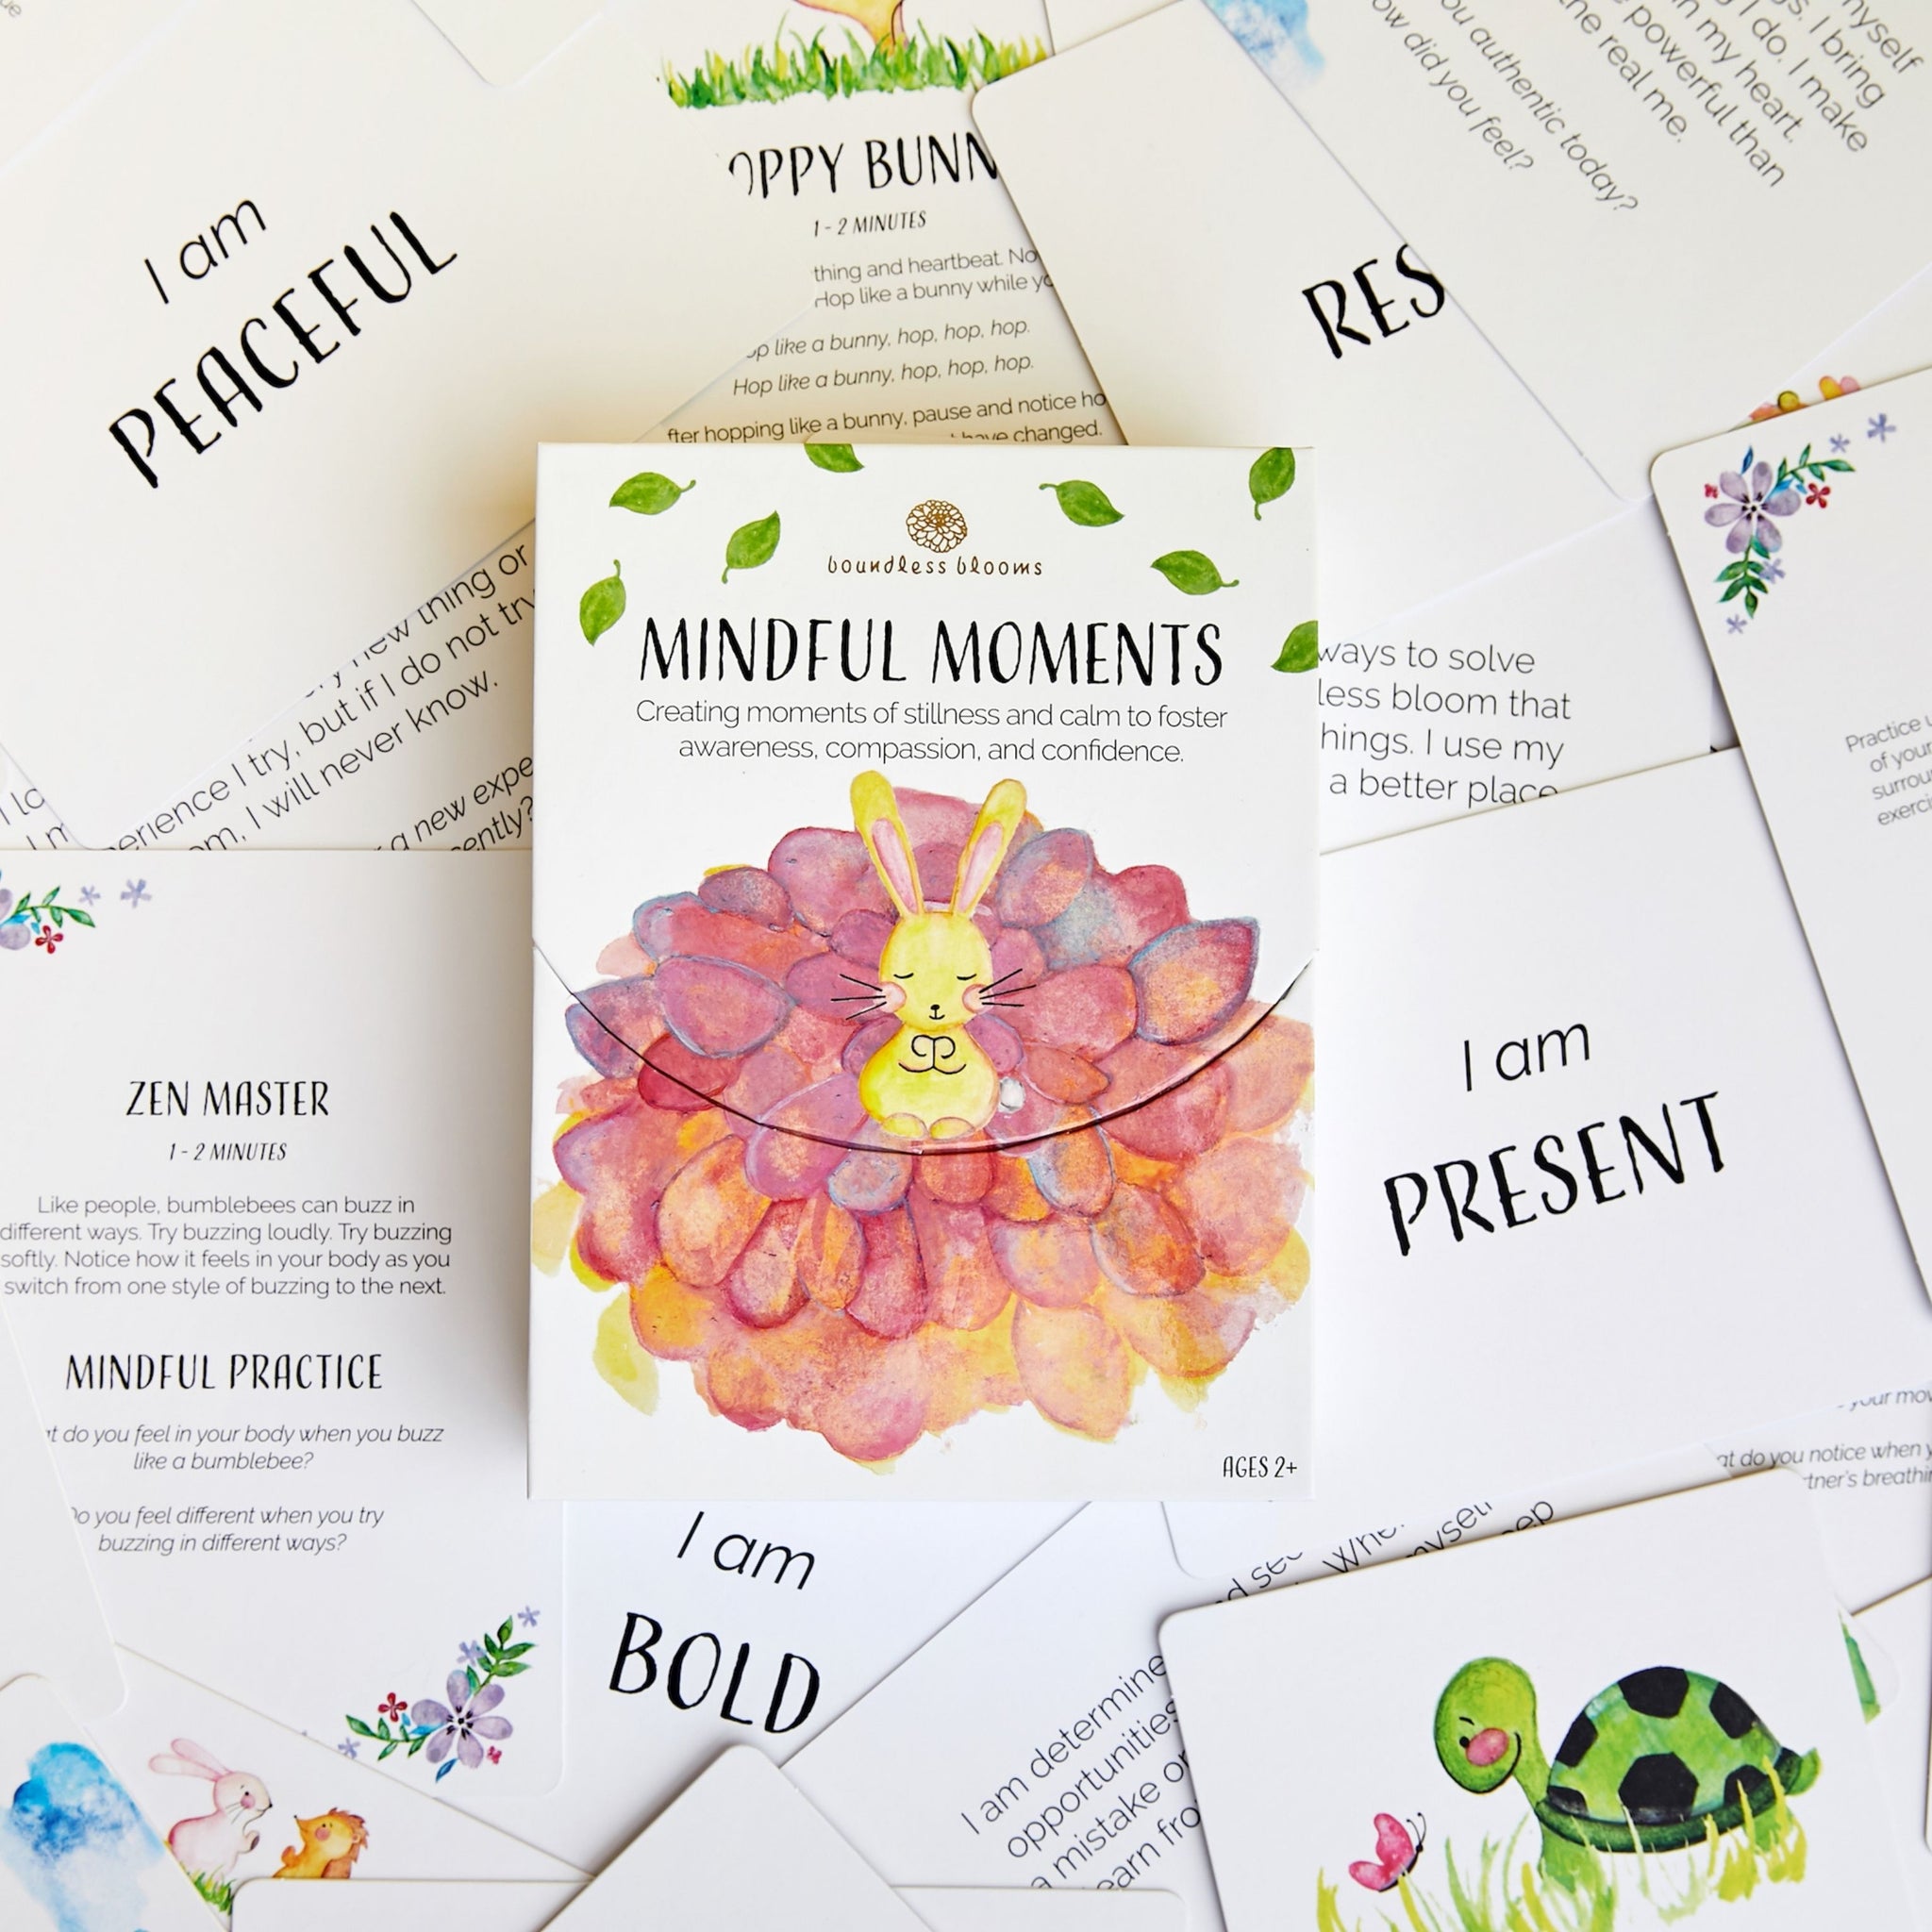 Mindful Movement Activities for When You're Stressed - Kb in Bloom